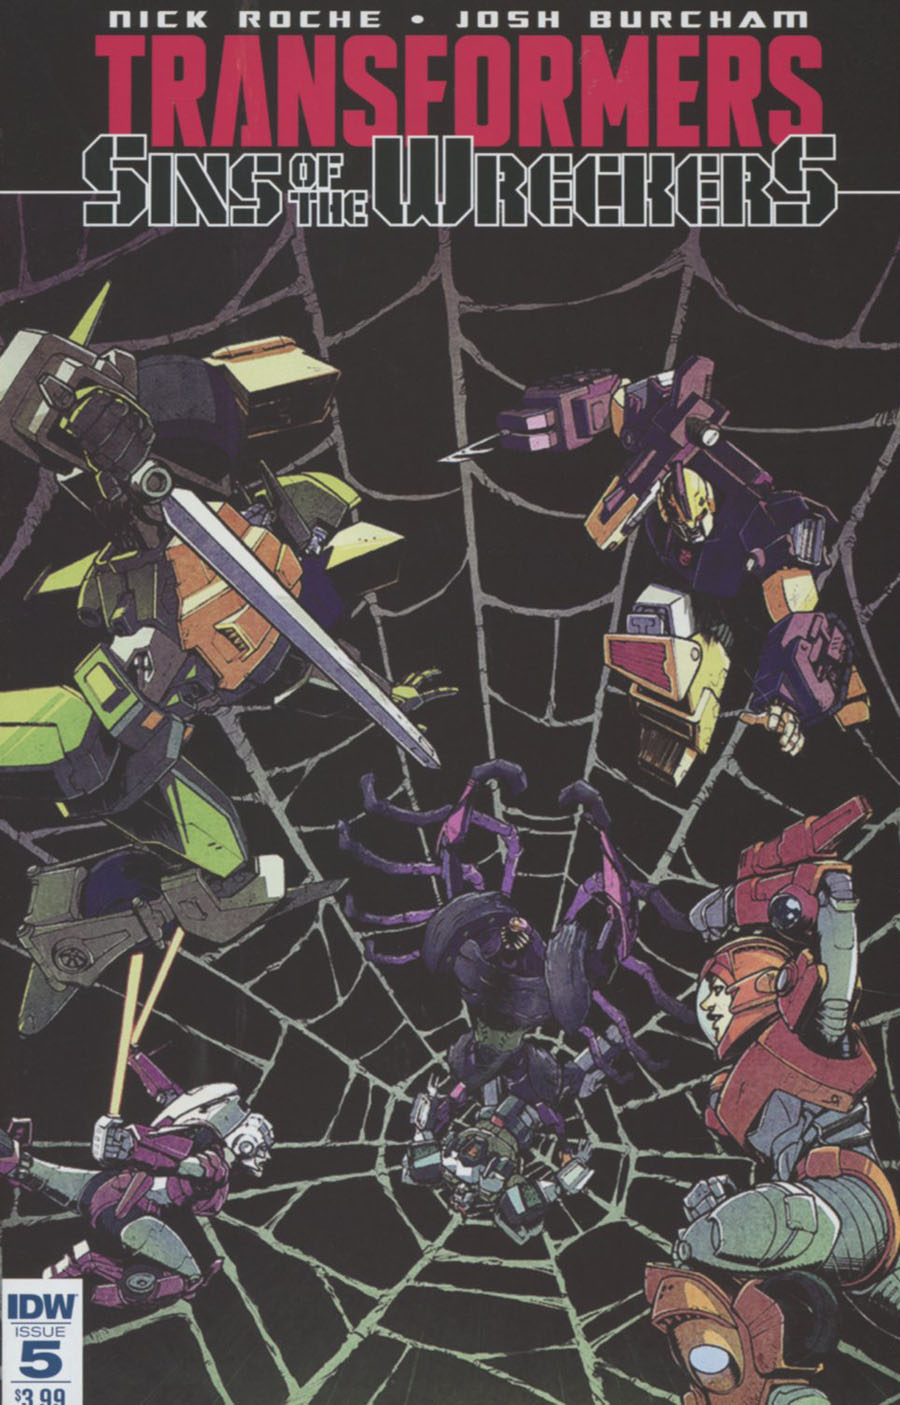 Transformers Sins Of The Wreckers #5 Cover A Regular Nick Roche Cover